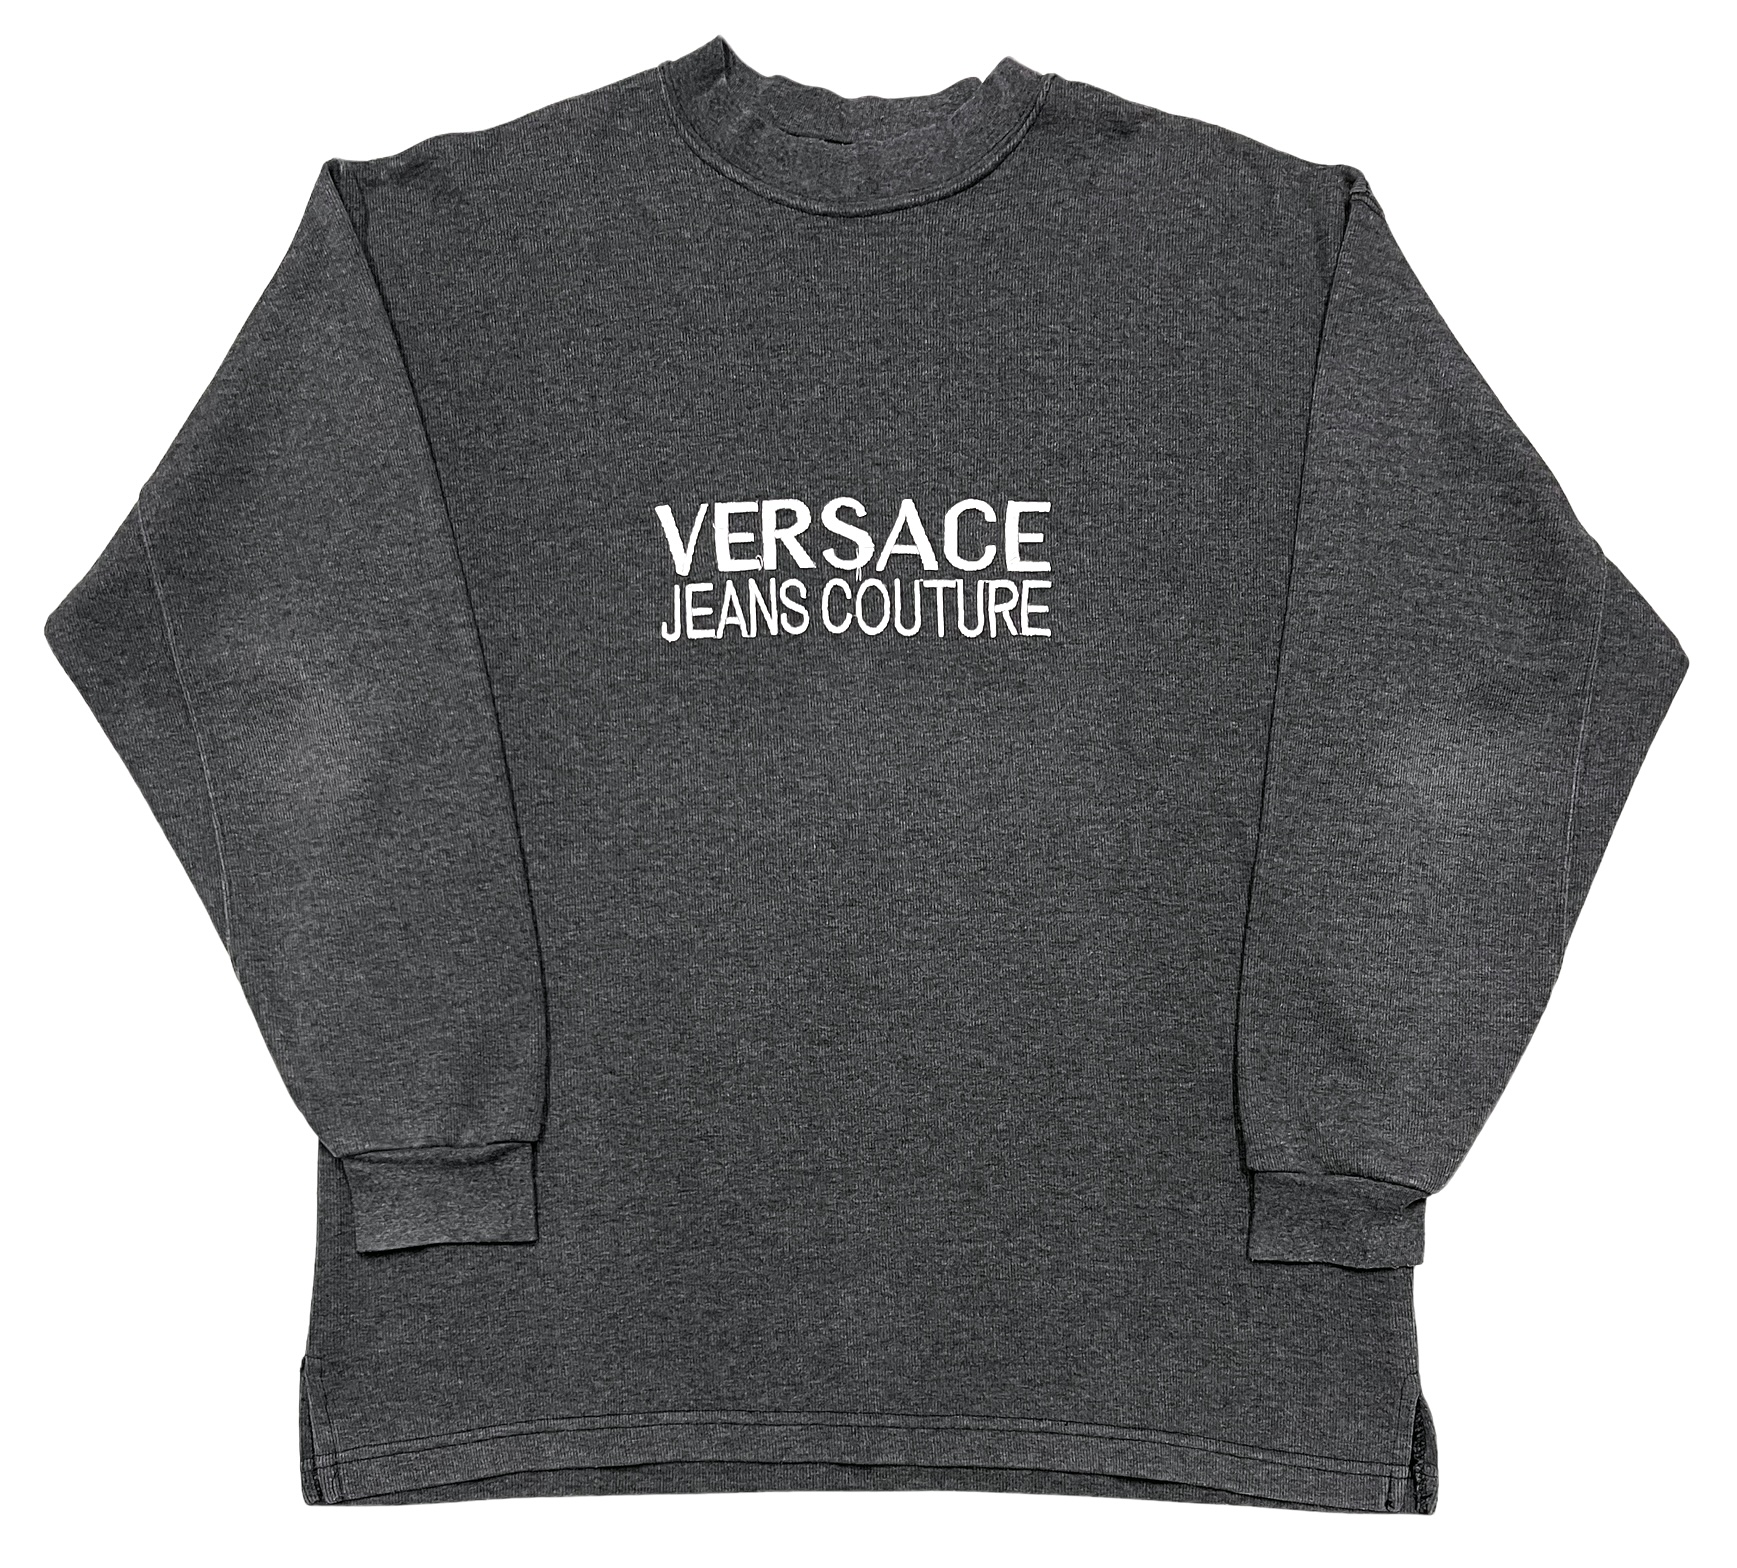 Versace bootleg embroidered sweater - Lowkey Archives